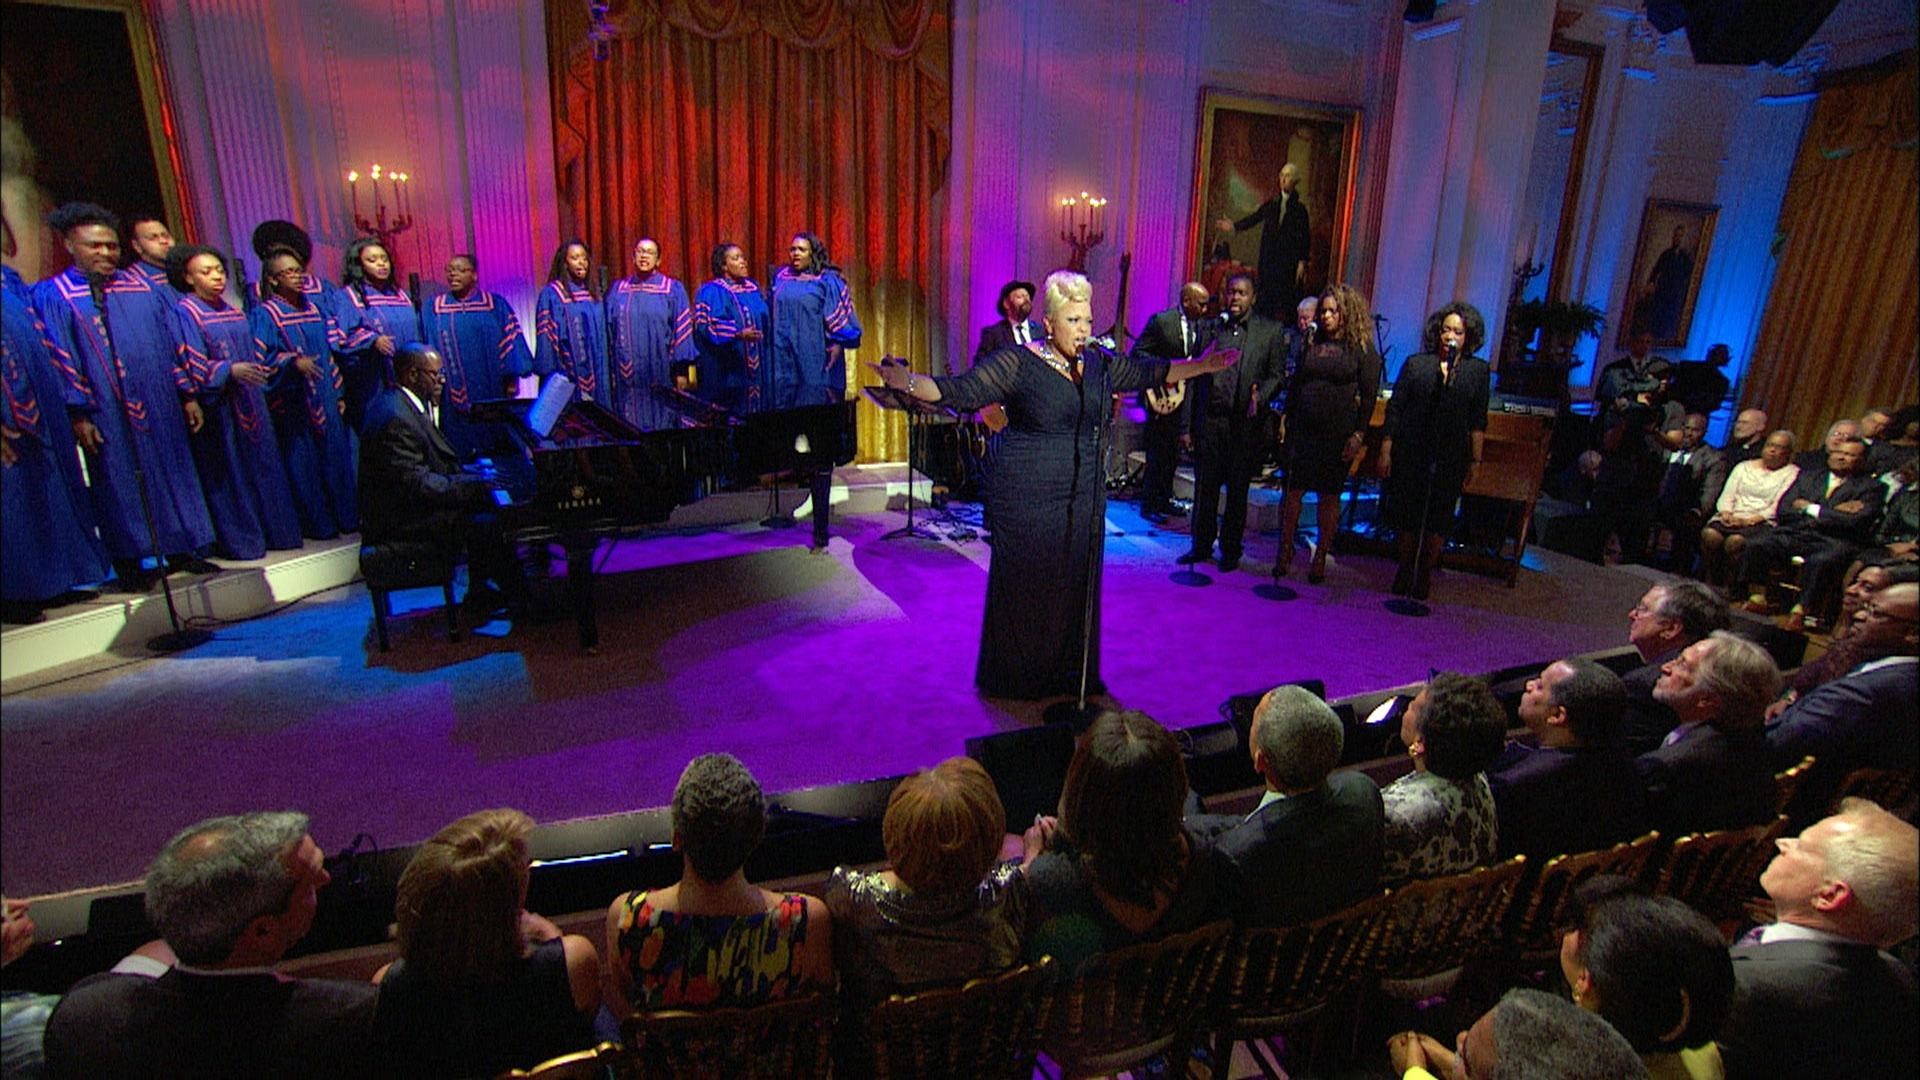 1920x1080 “The Gospel Tradition: In Performance at the White House” | Season 2015  Episode 1 | In Performance at The White House | PBS